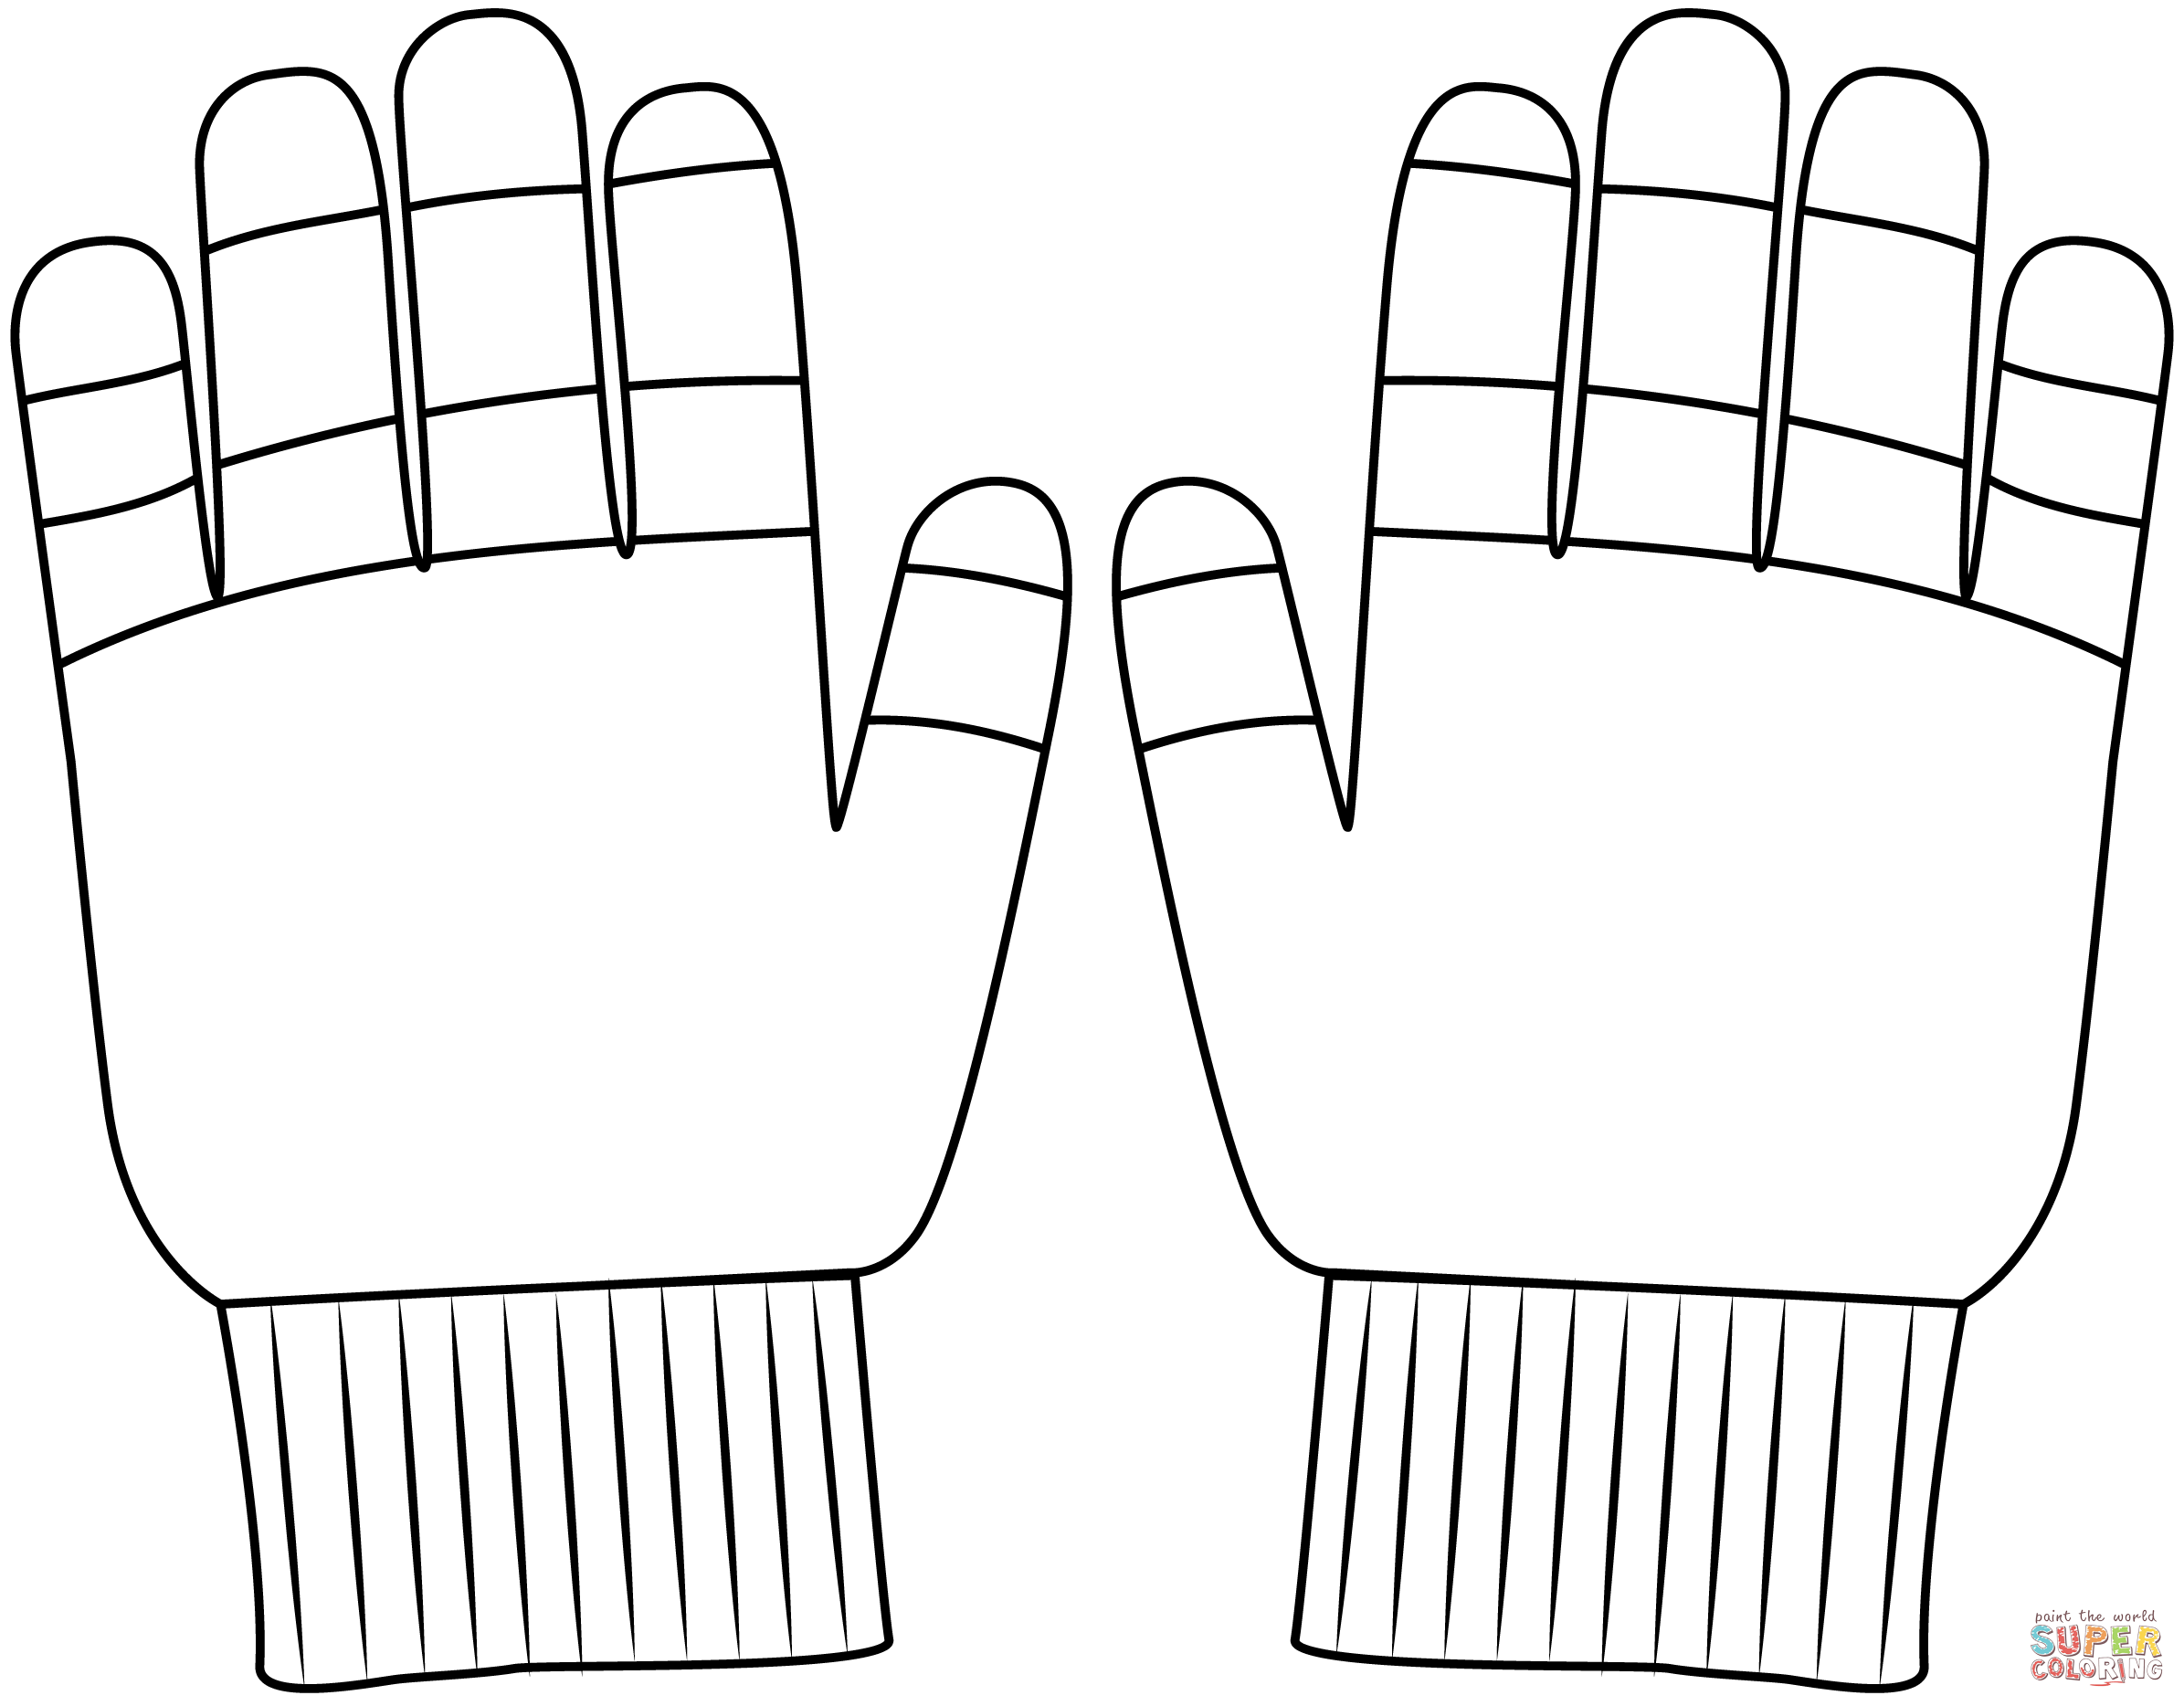 Gloves coloring page free printable coloring pages